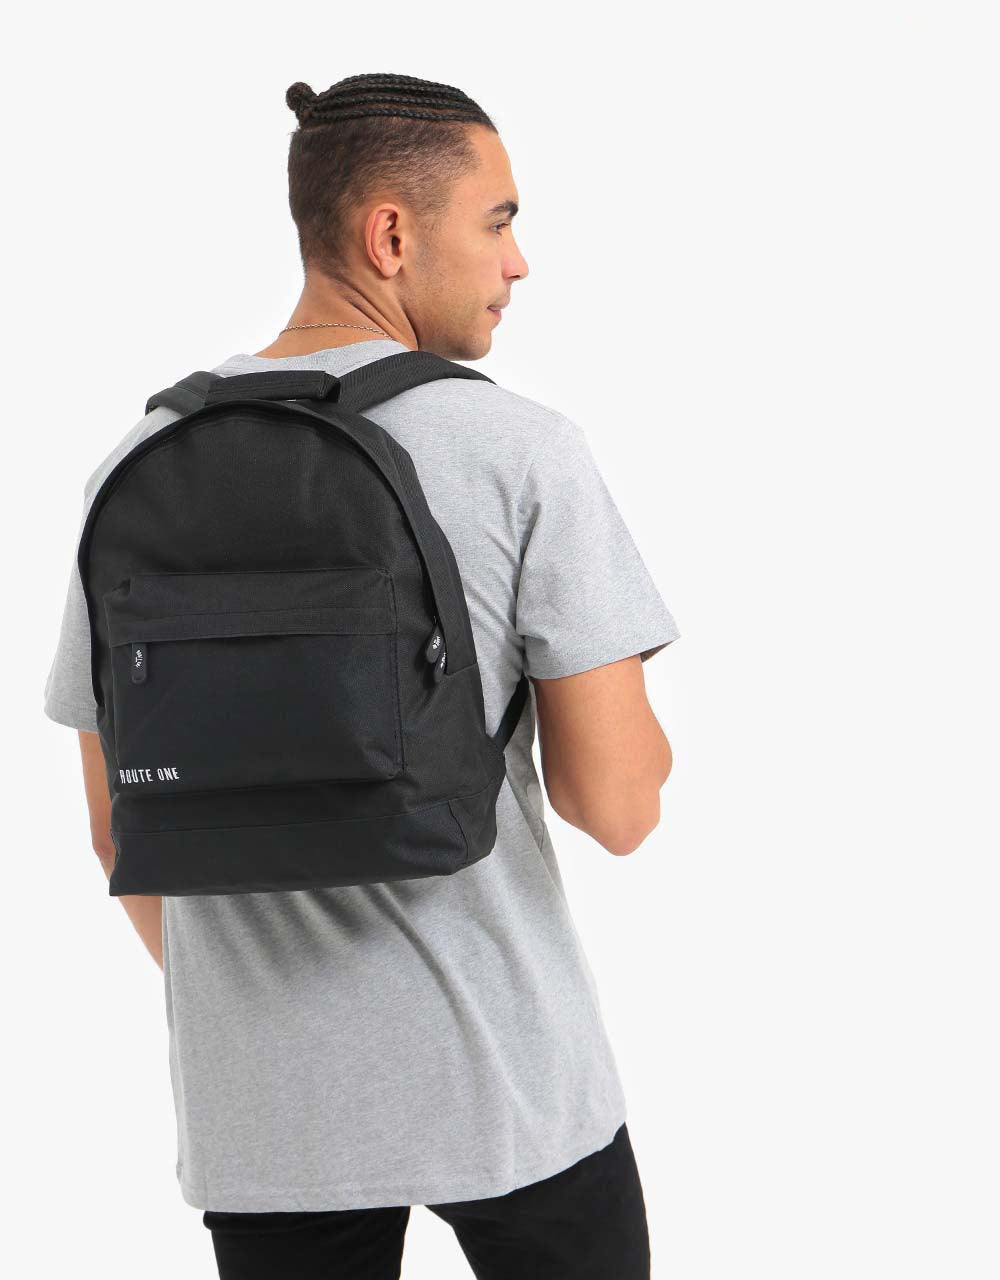 Route One Backpack - Black